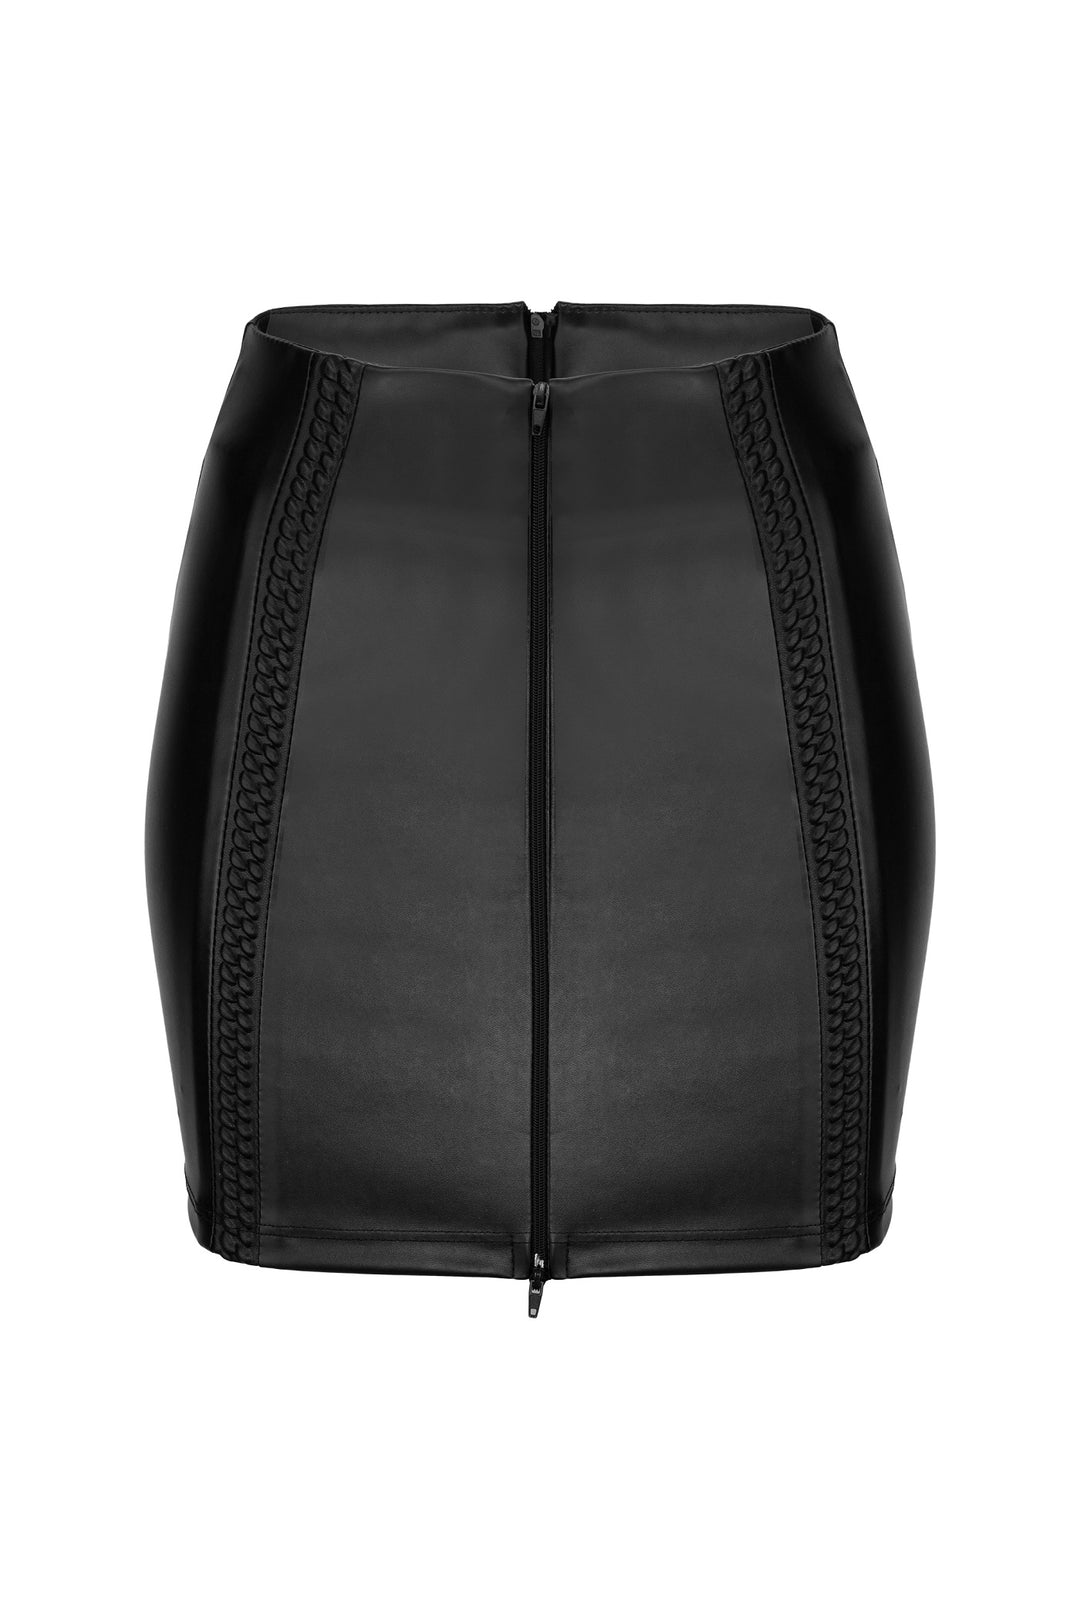 Wet Look Eco-Leather skirt with tape